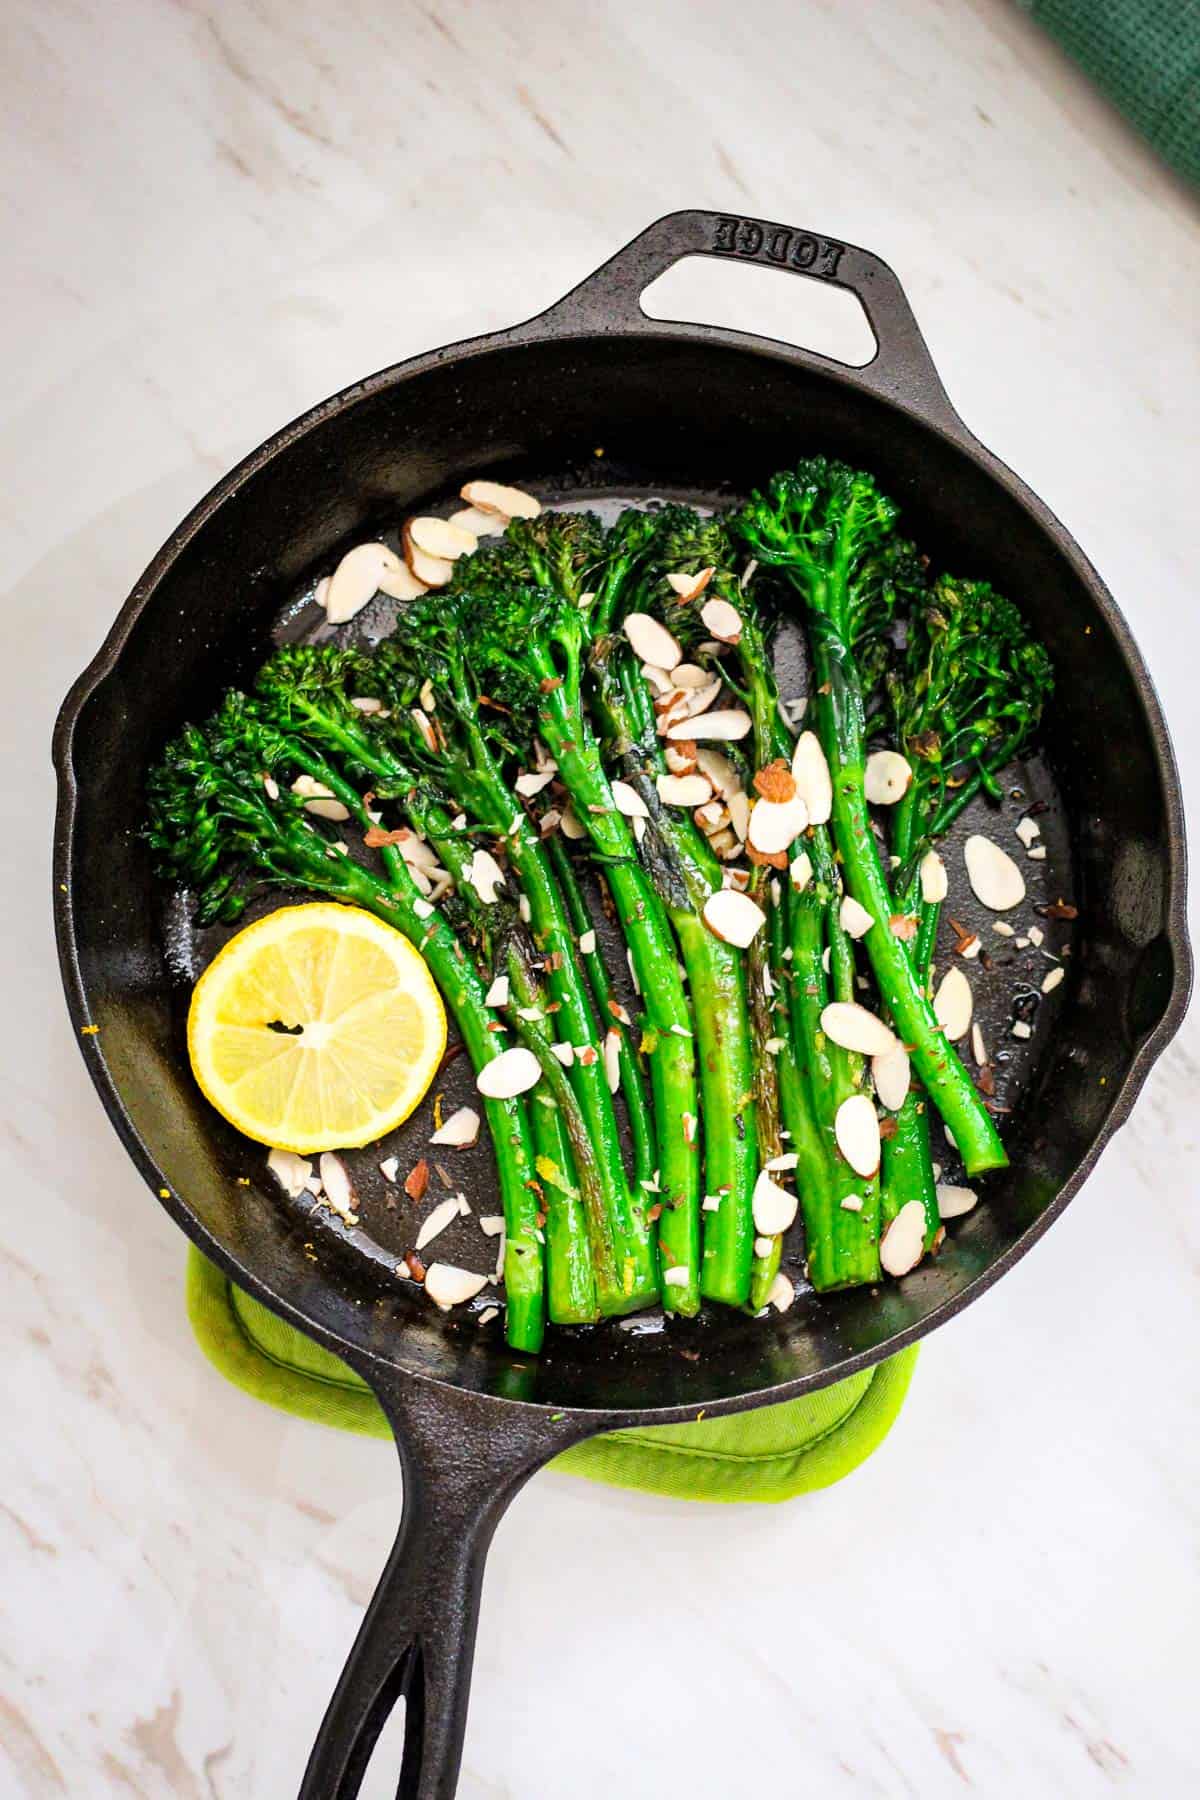 A cast iron skillet with sauteed broccolini. Skillet shows some almonds and a slice of lemon as well.